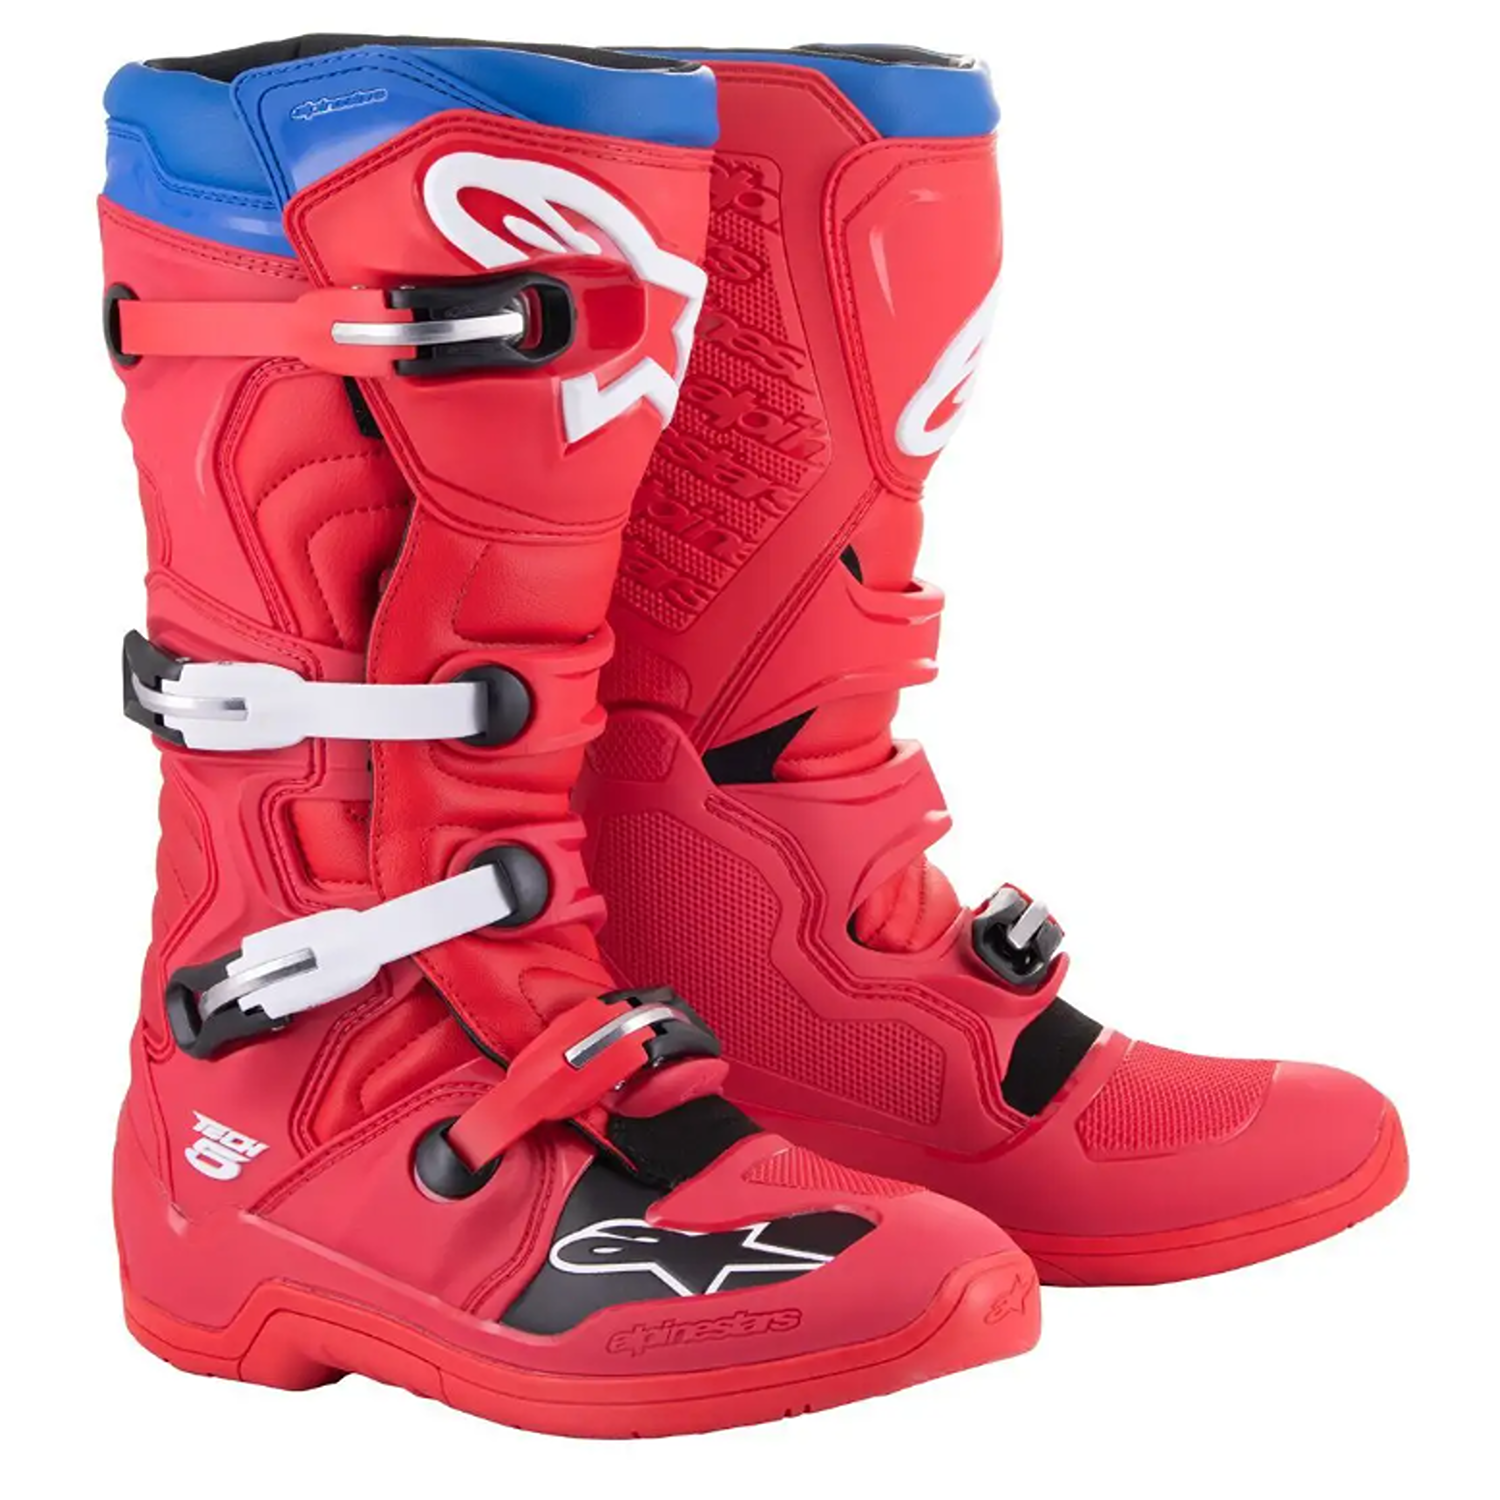 Image of Alpinestars Tech 5 Boots Bright Red Dark Red Blue Size US 9 ID 8059347199344